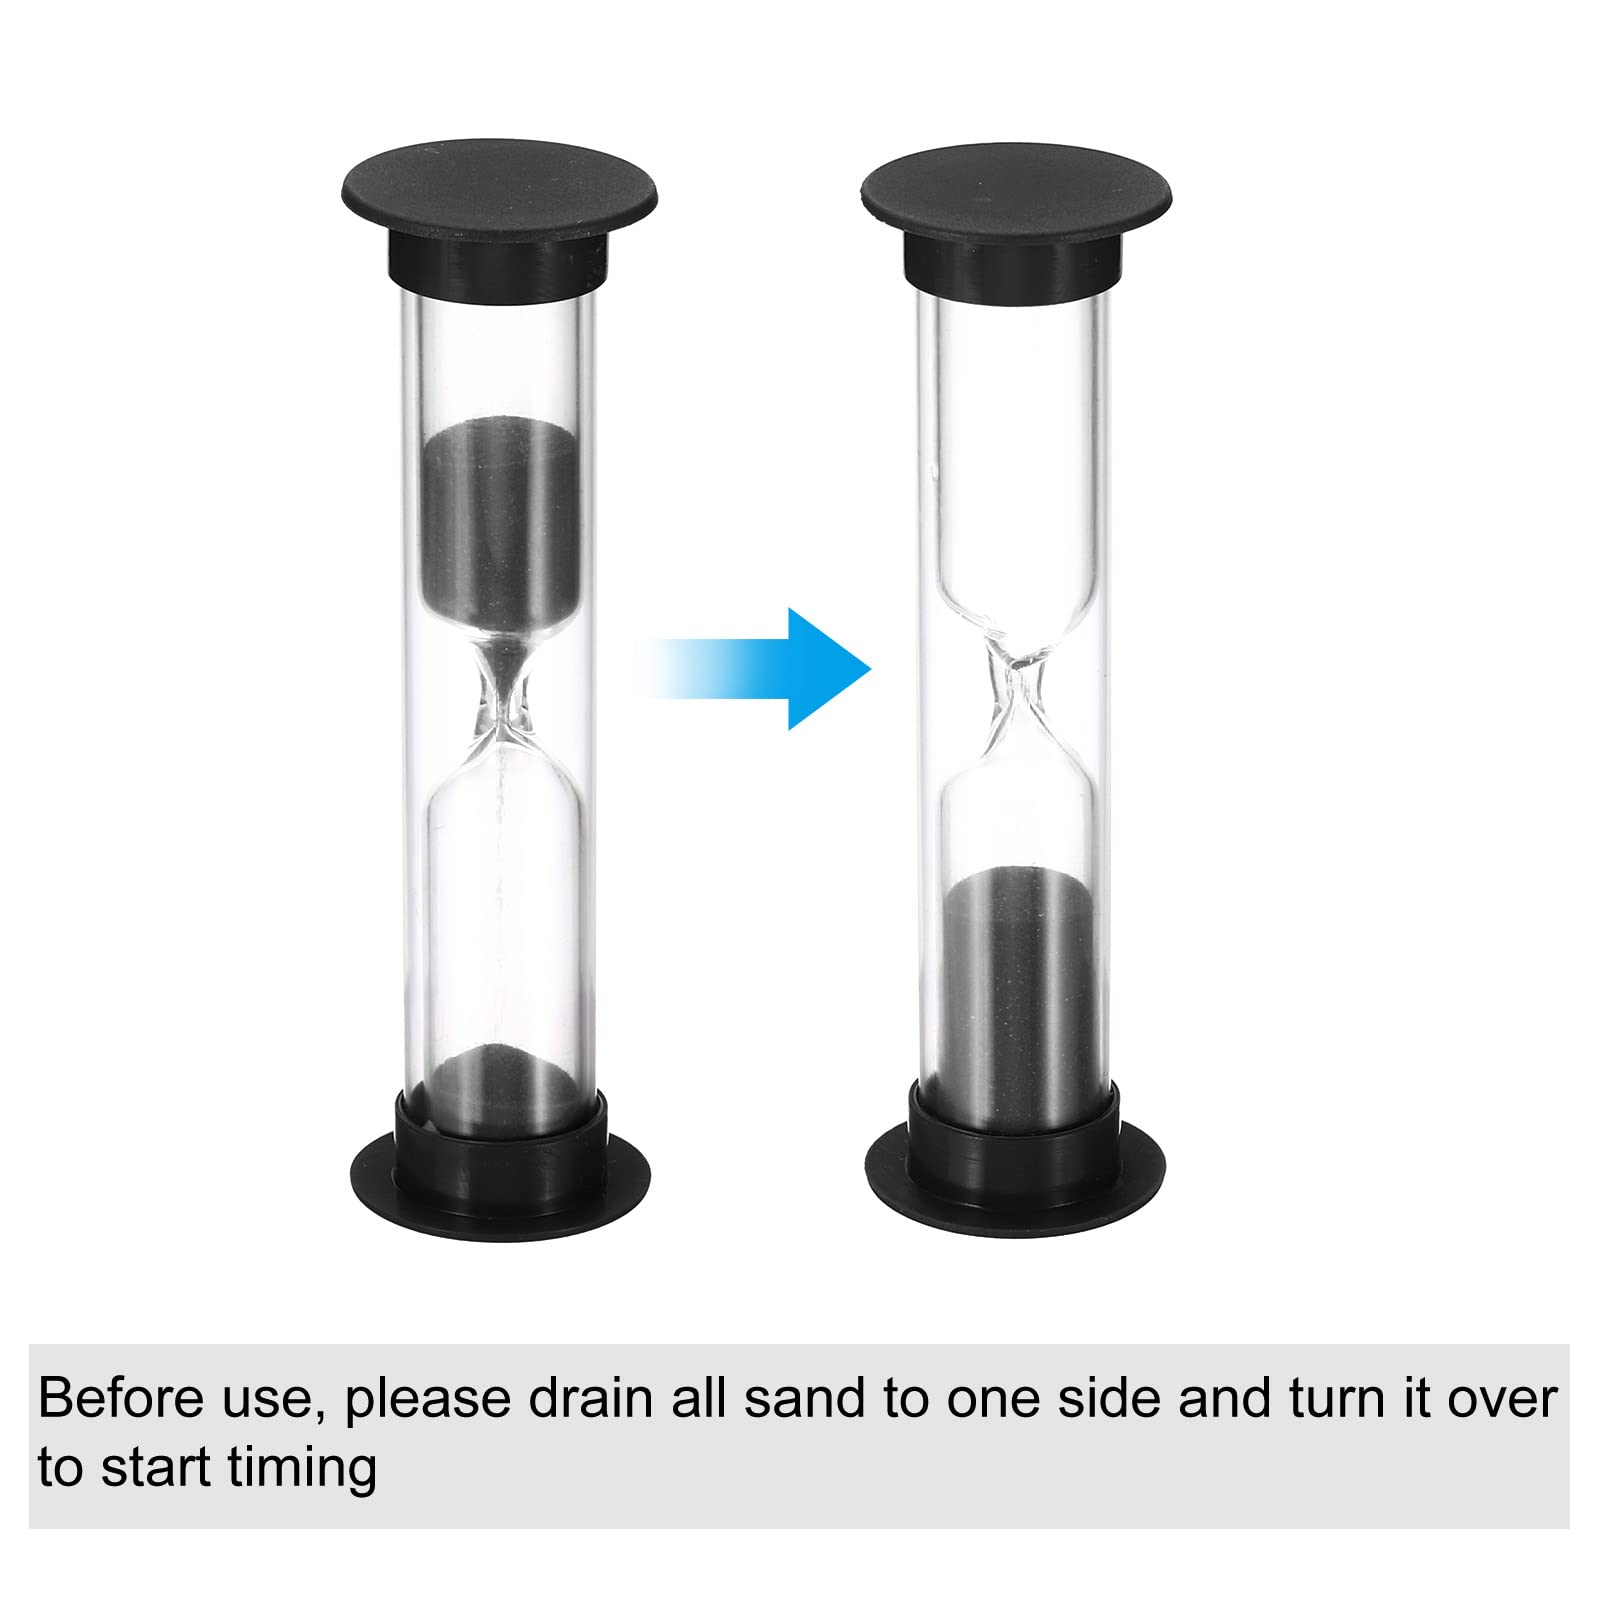 PATIKIL 3 Minute Sand Timer, 4Pcs Small Sandy Clock with Plastic Cover, Count Down Sand Glass for Games, Kitchen, Party Favors DIY Decoration, Black